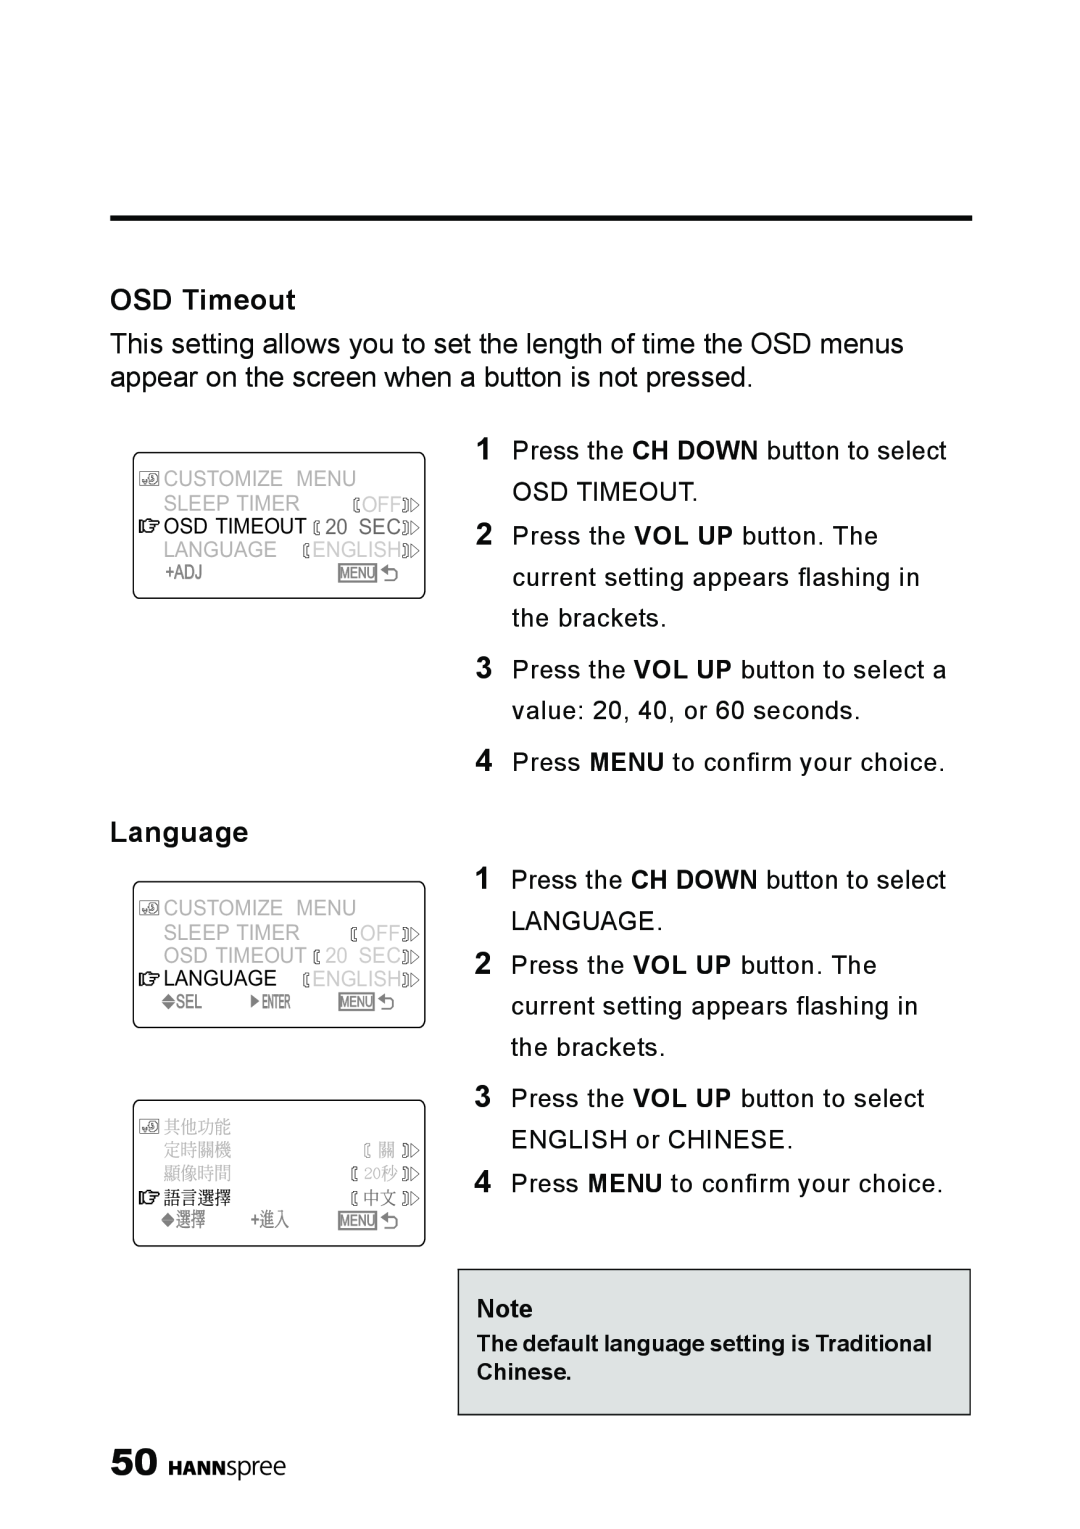 HANNspree ST09-10A1 user manual OSD Timeout, Language, The default language setting is Traditional Chinese 